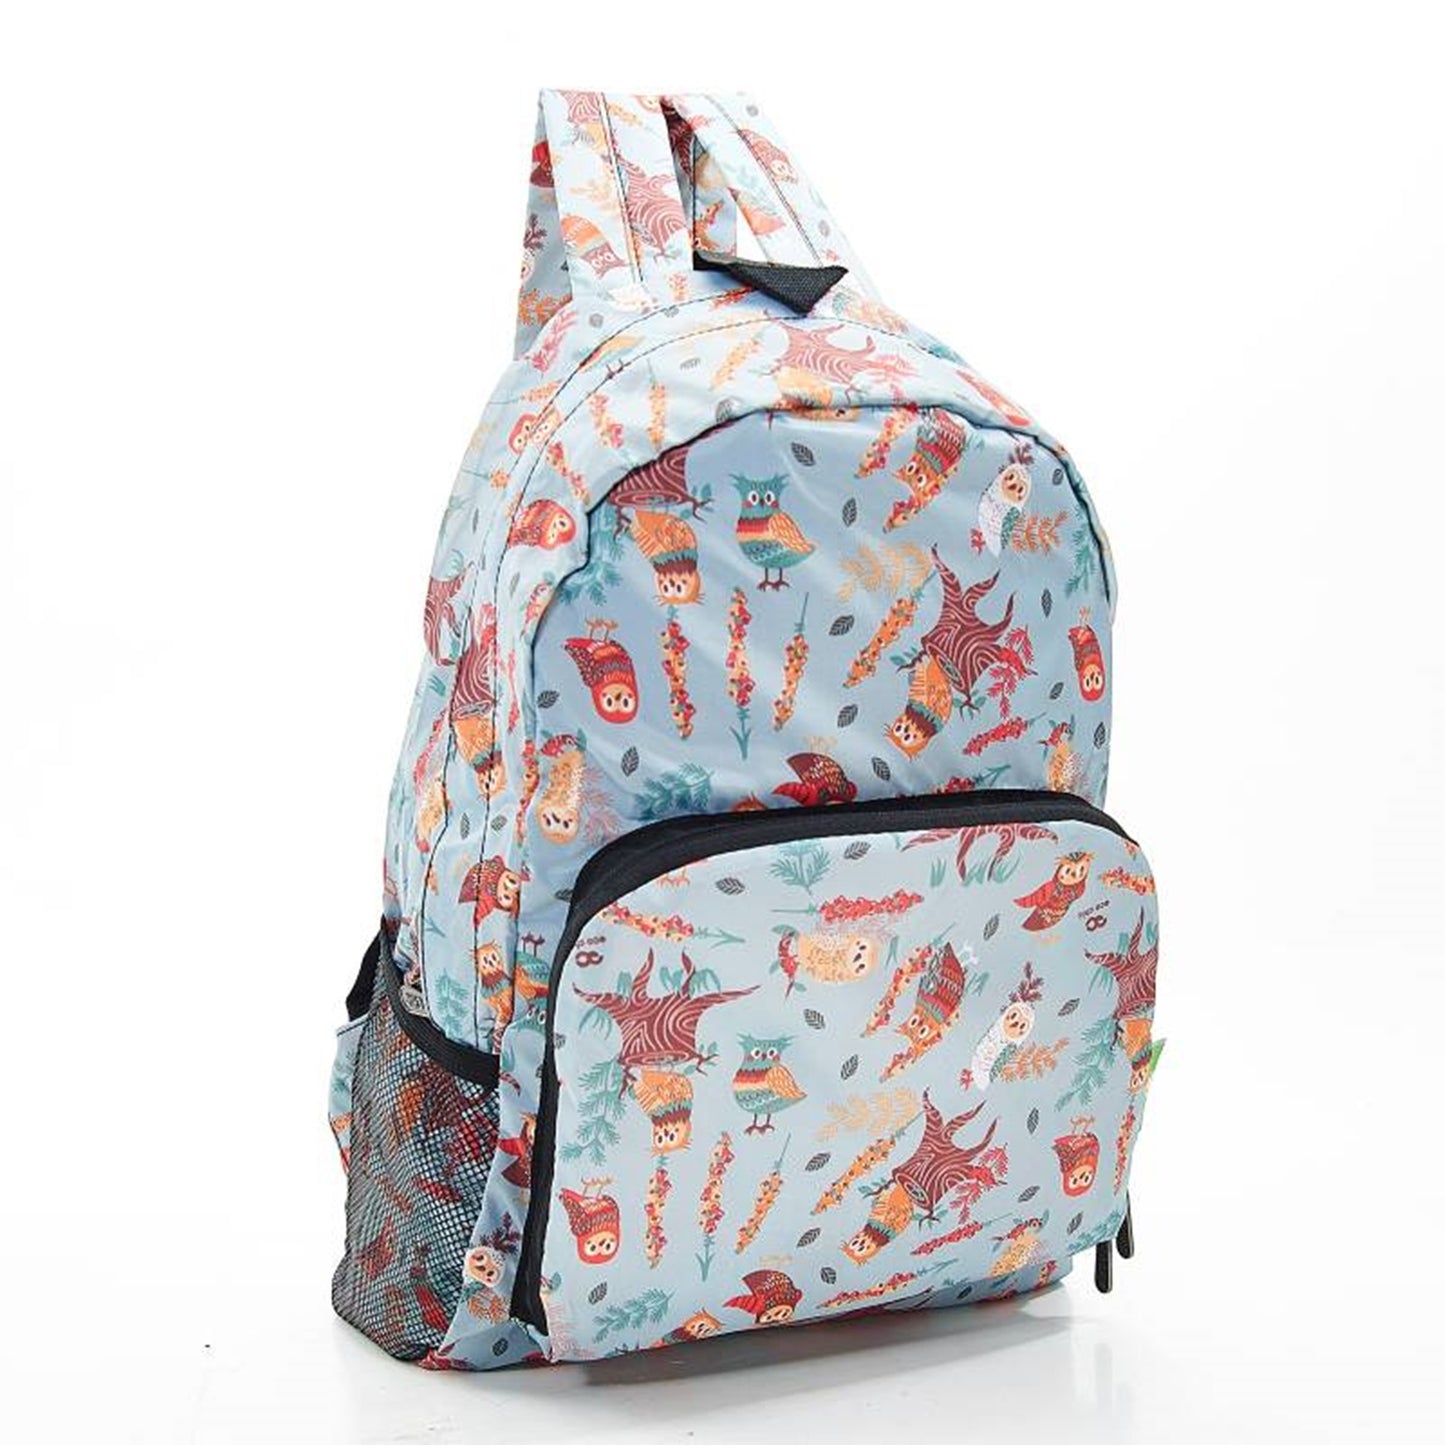 ECO CHIC Foldaway Back Pack/School Bag/Shopping Bag - Made From Recycled Plastic Bottles - Owls (Blue)